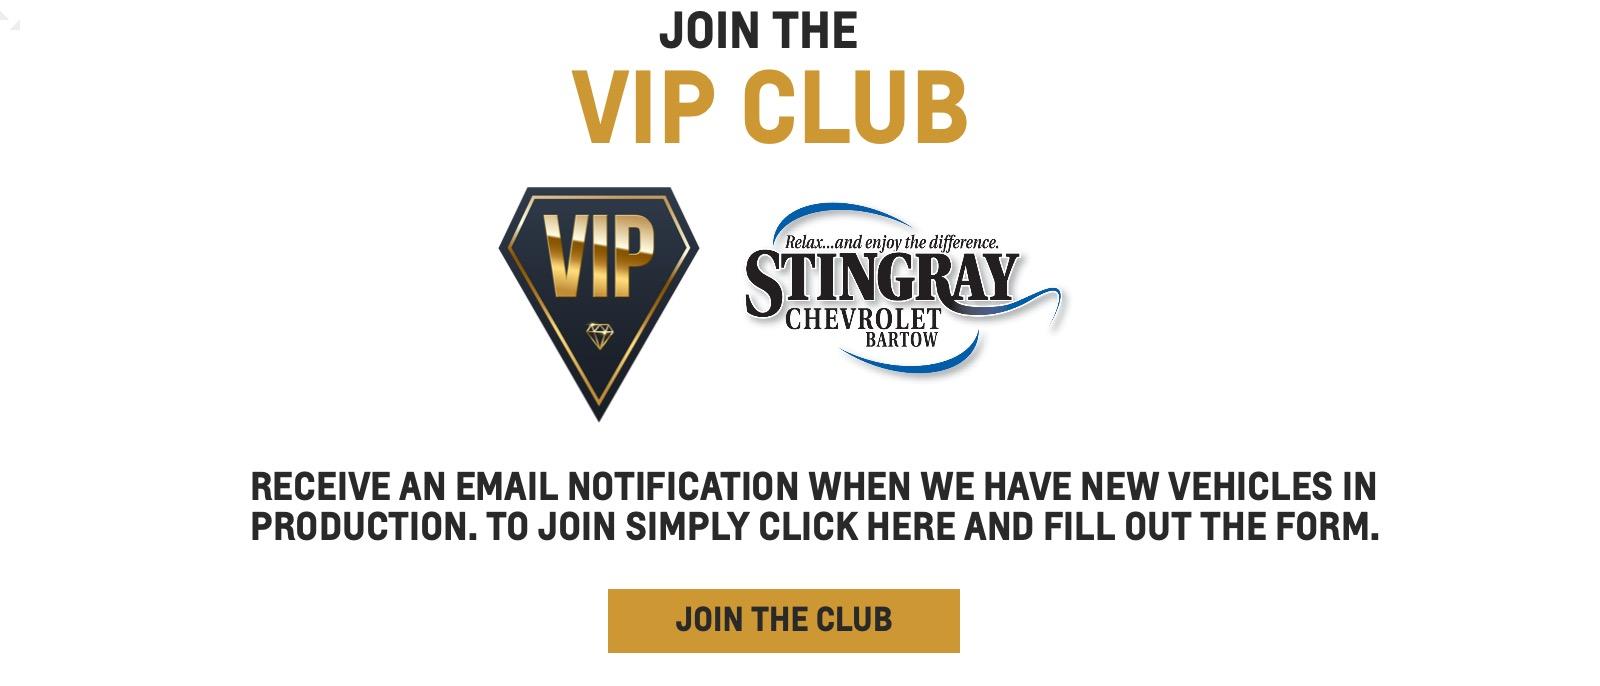 JOIN THE VIP CLUB